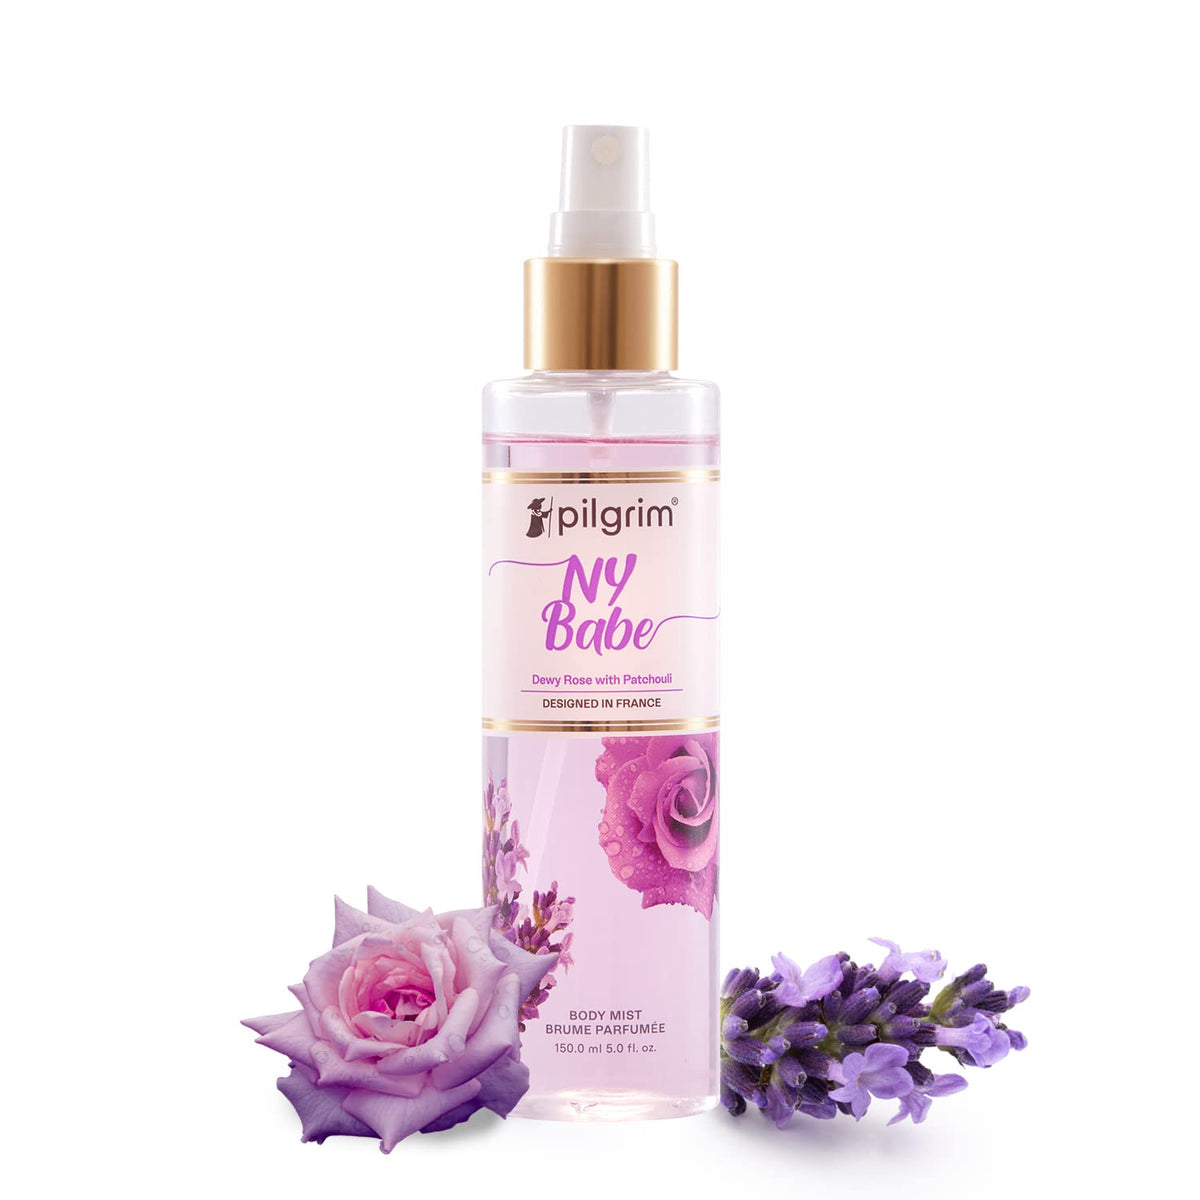 Pilgrim NY Babe Body Mist (Rose with Patchouli)| Rose body mist for women long lasting| Dewy rose & Bold Patchouli for confident women| Rose fragrance perfume for women| Designed in France| 150 ml